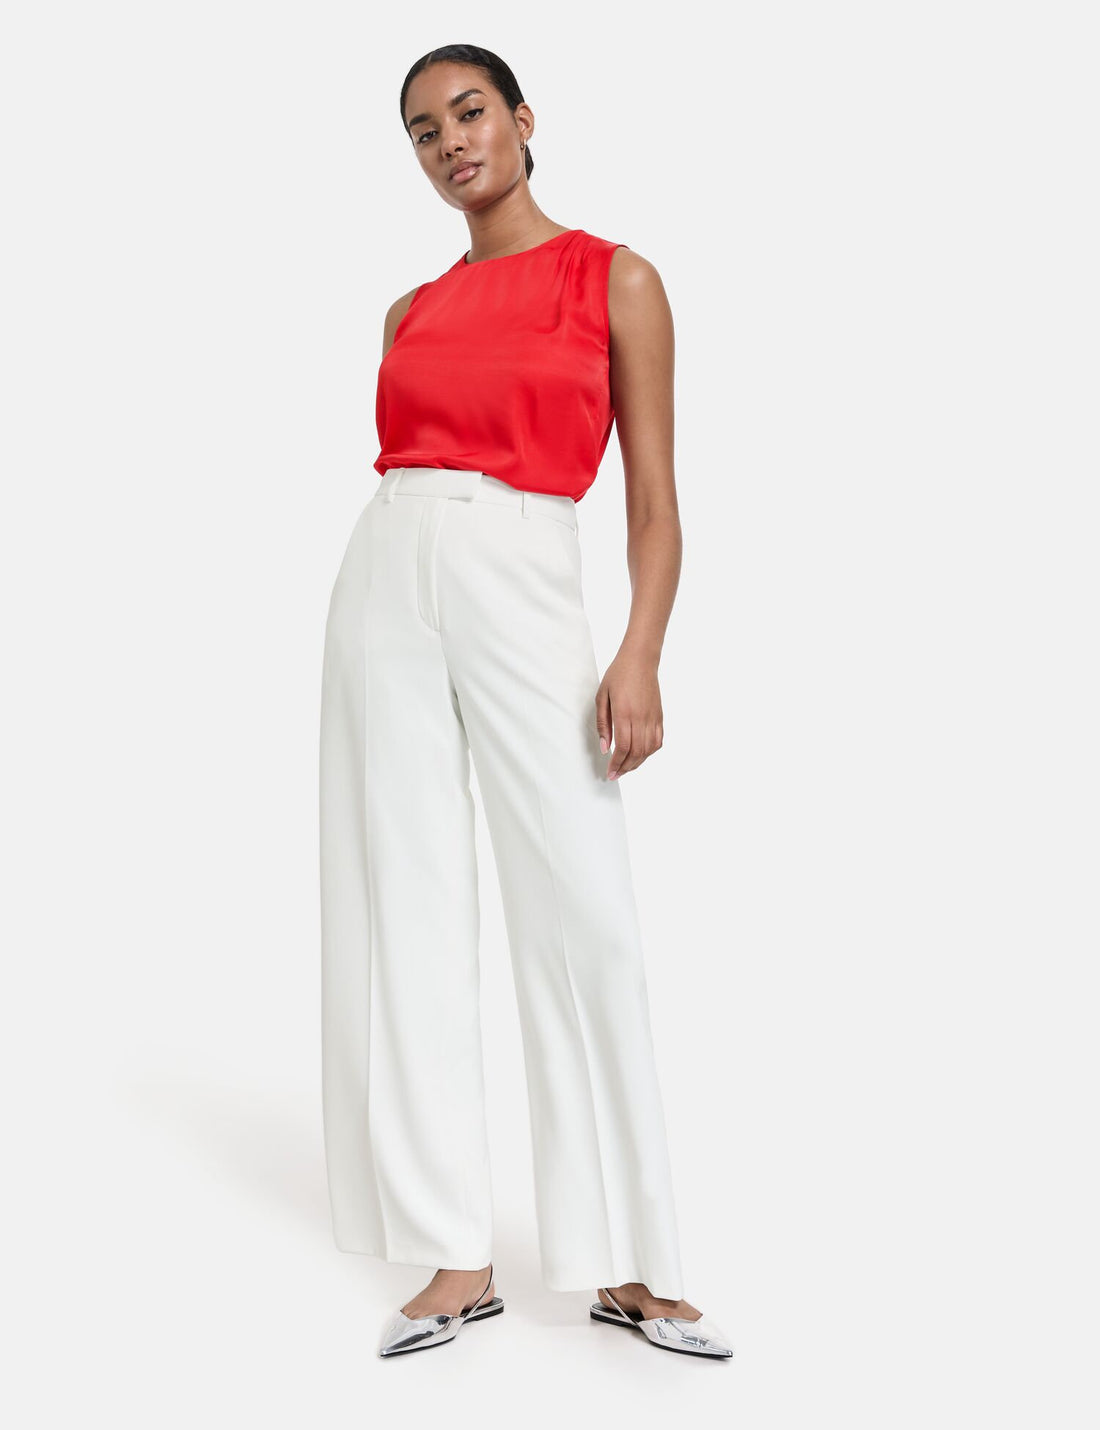 Elegant Trousers With A Wide Leg_520334-11081_9600_01